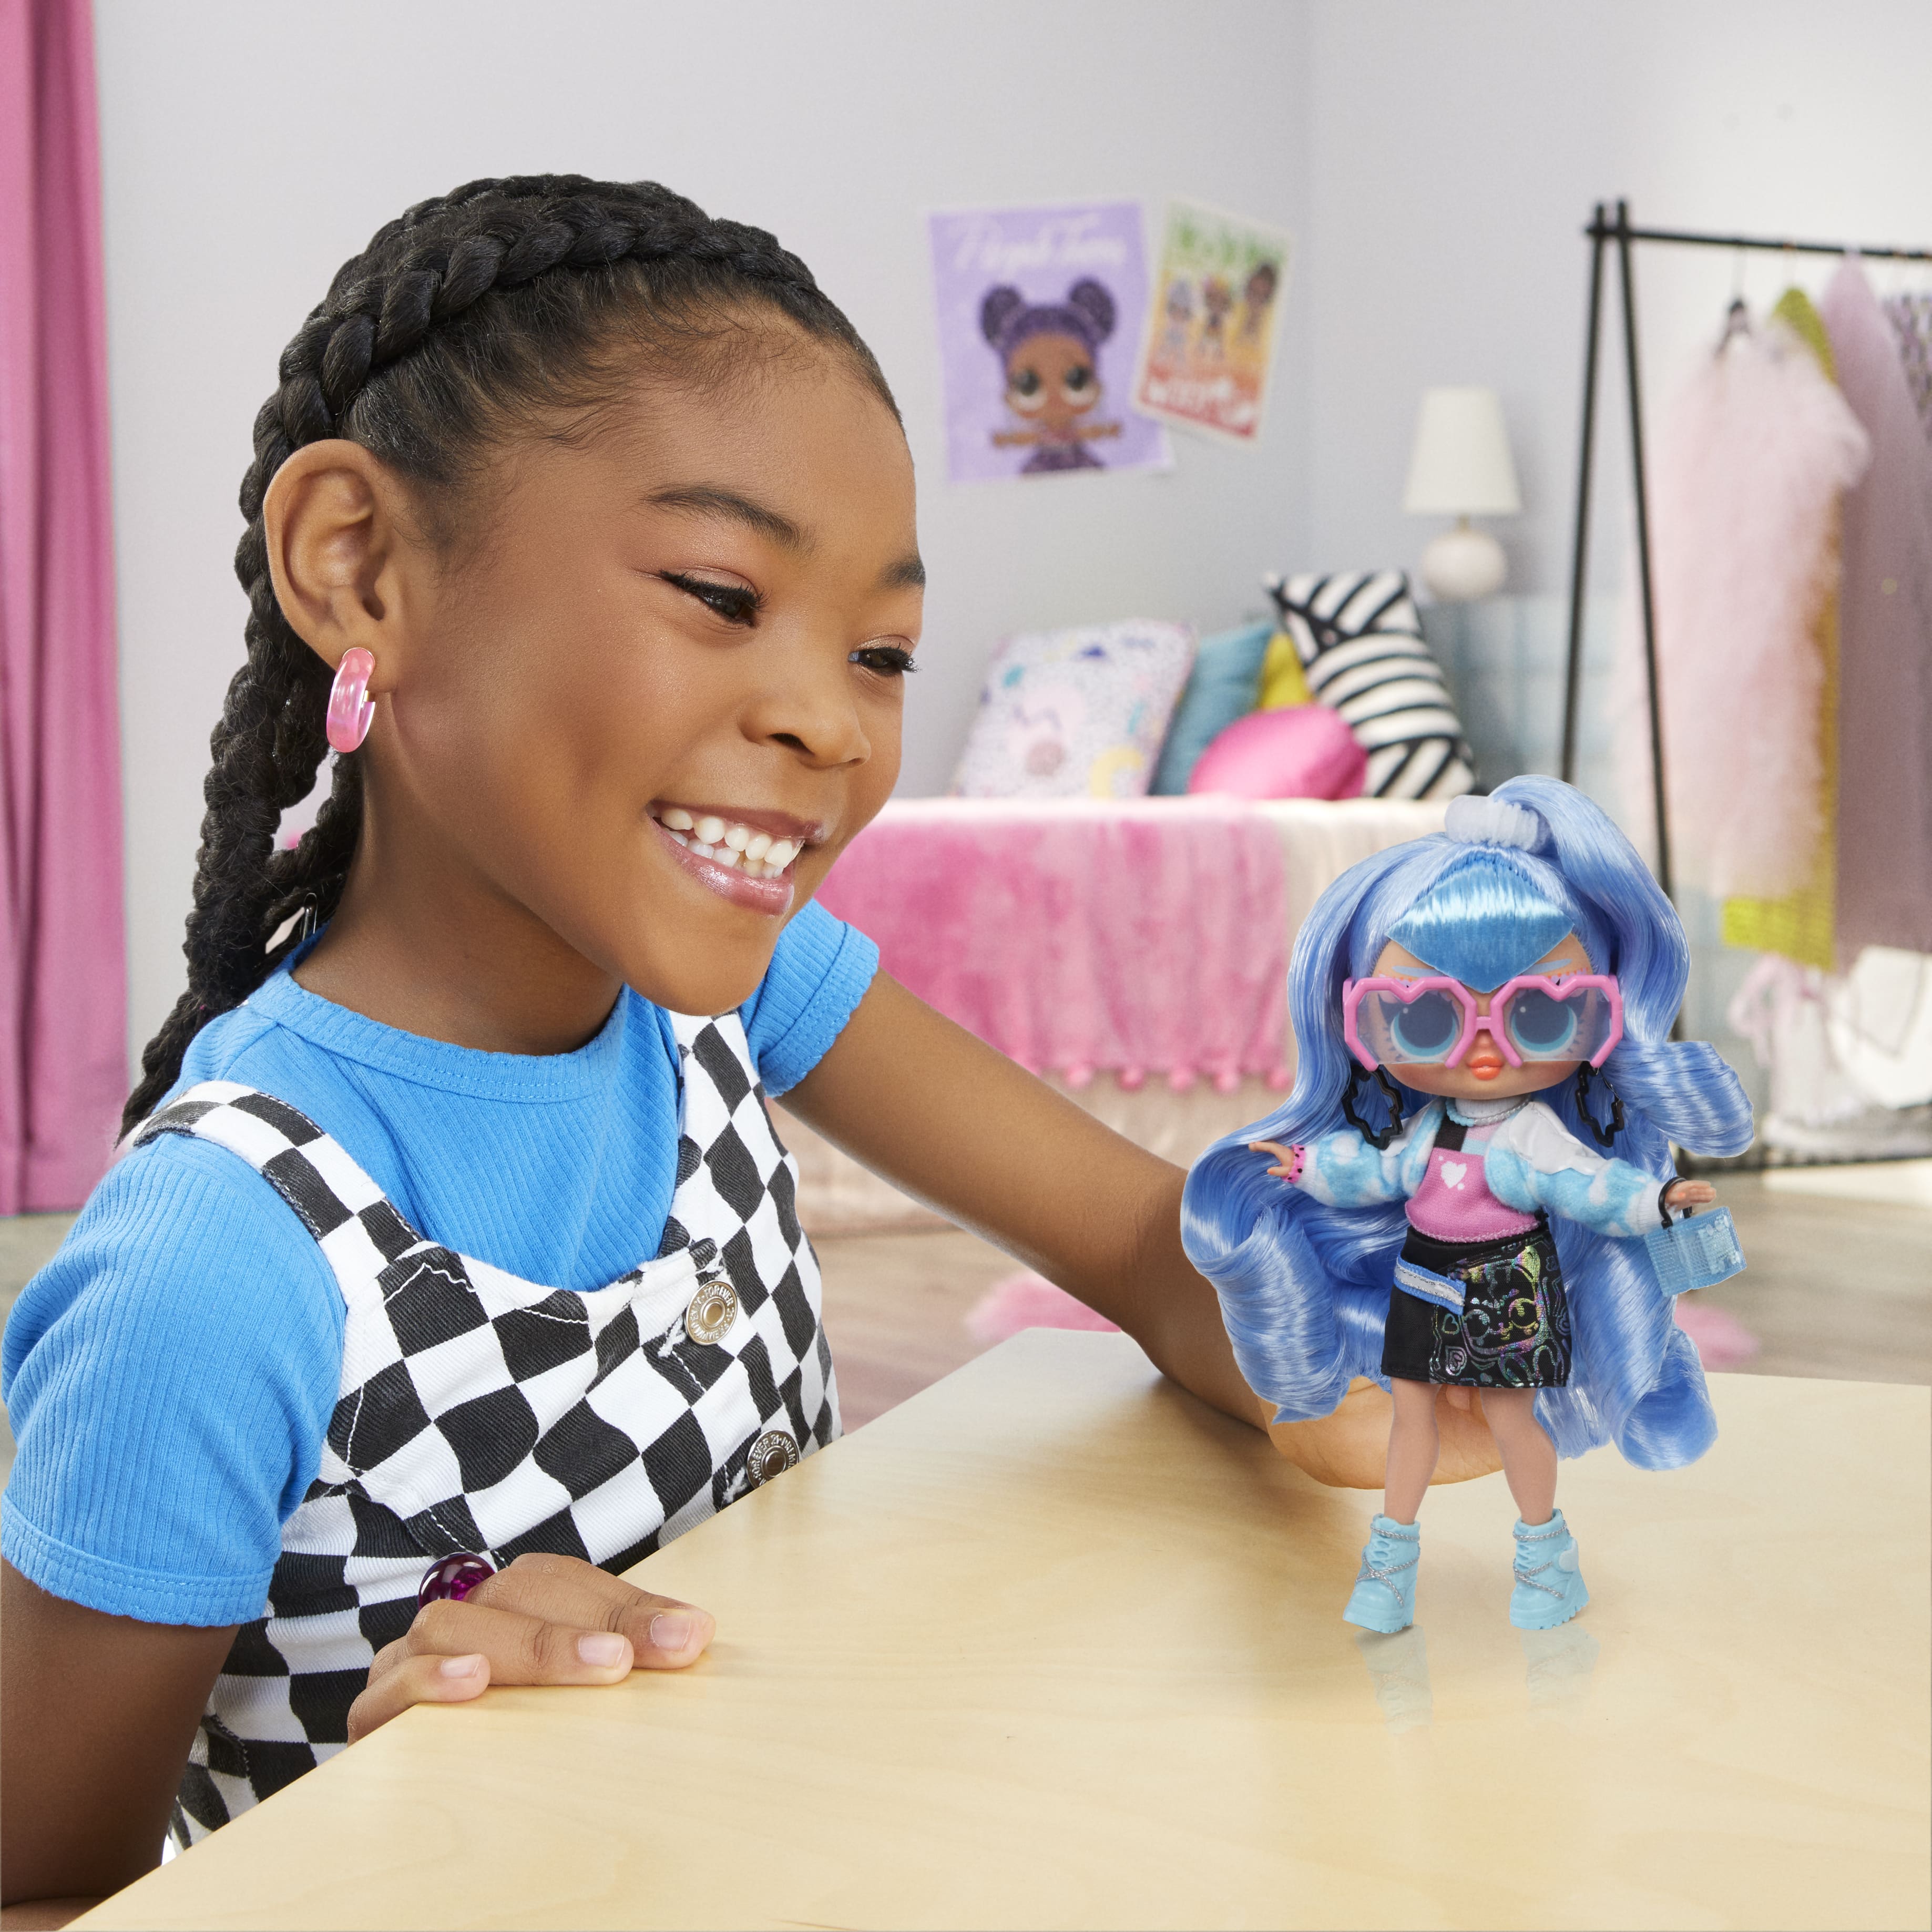 LOL Surprise Tweens Fashion Doll Ellie Fly with 10+ Surprises, Great Gift for Kids Ages 4+ - image 5 of 7